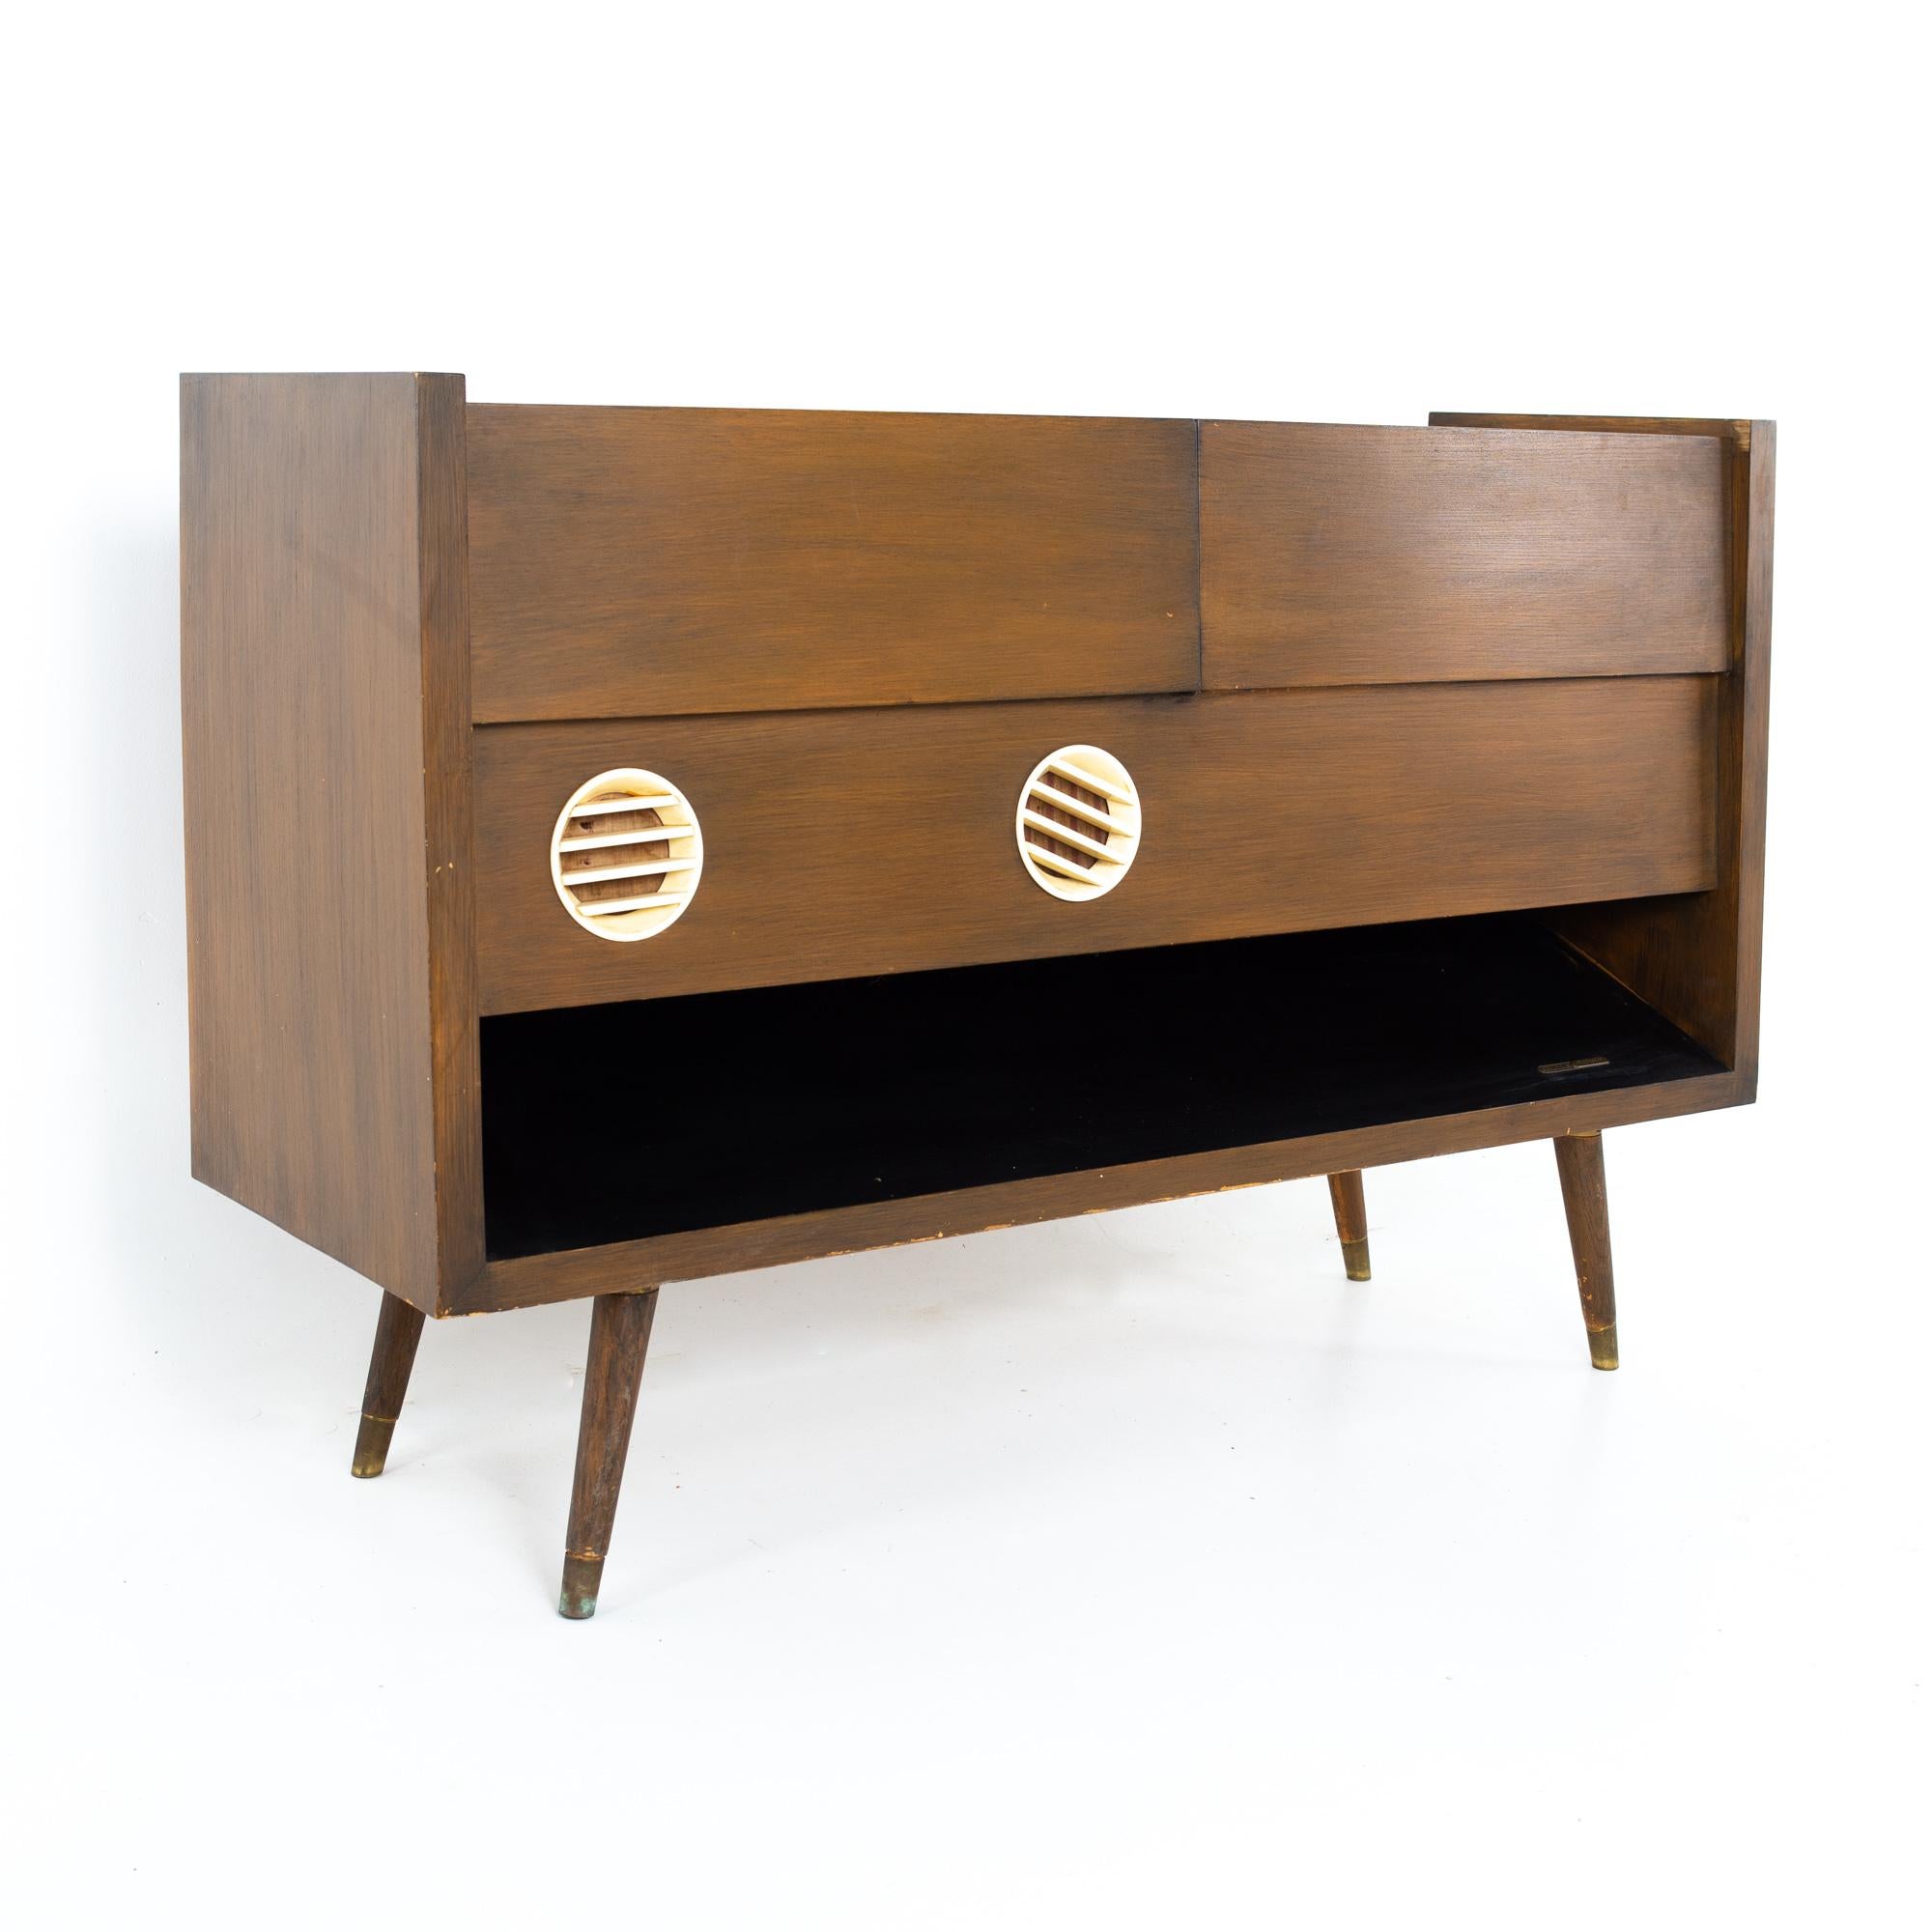 Grundig majestic Mid Century record console stereo
Stereo measures: 48.5 wide x 15 deep x 31.5 inches high

This price includes getting this piece in what we call restored vintage condition. That means the piece is permanently fixed upon purchase so